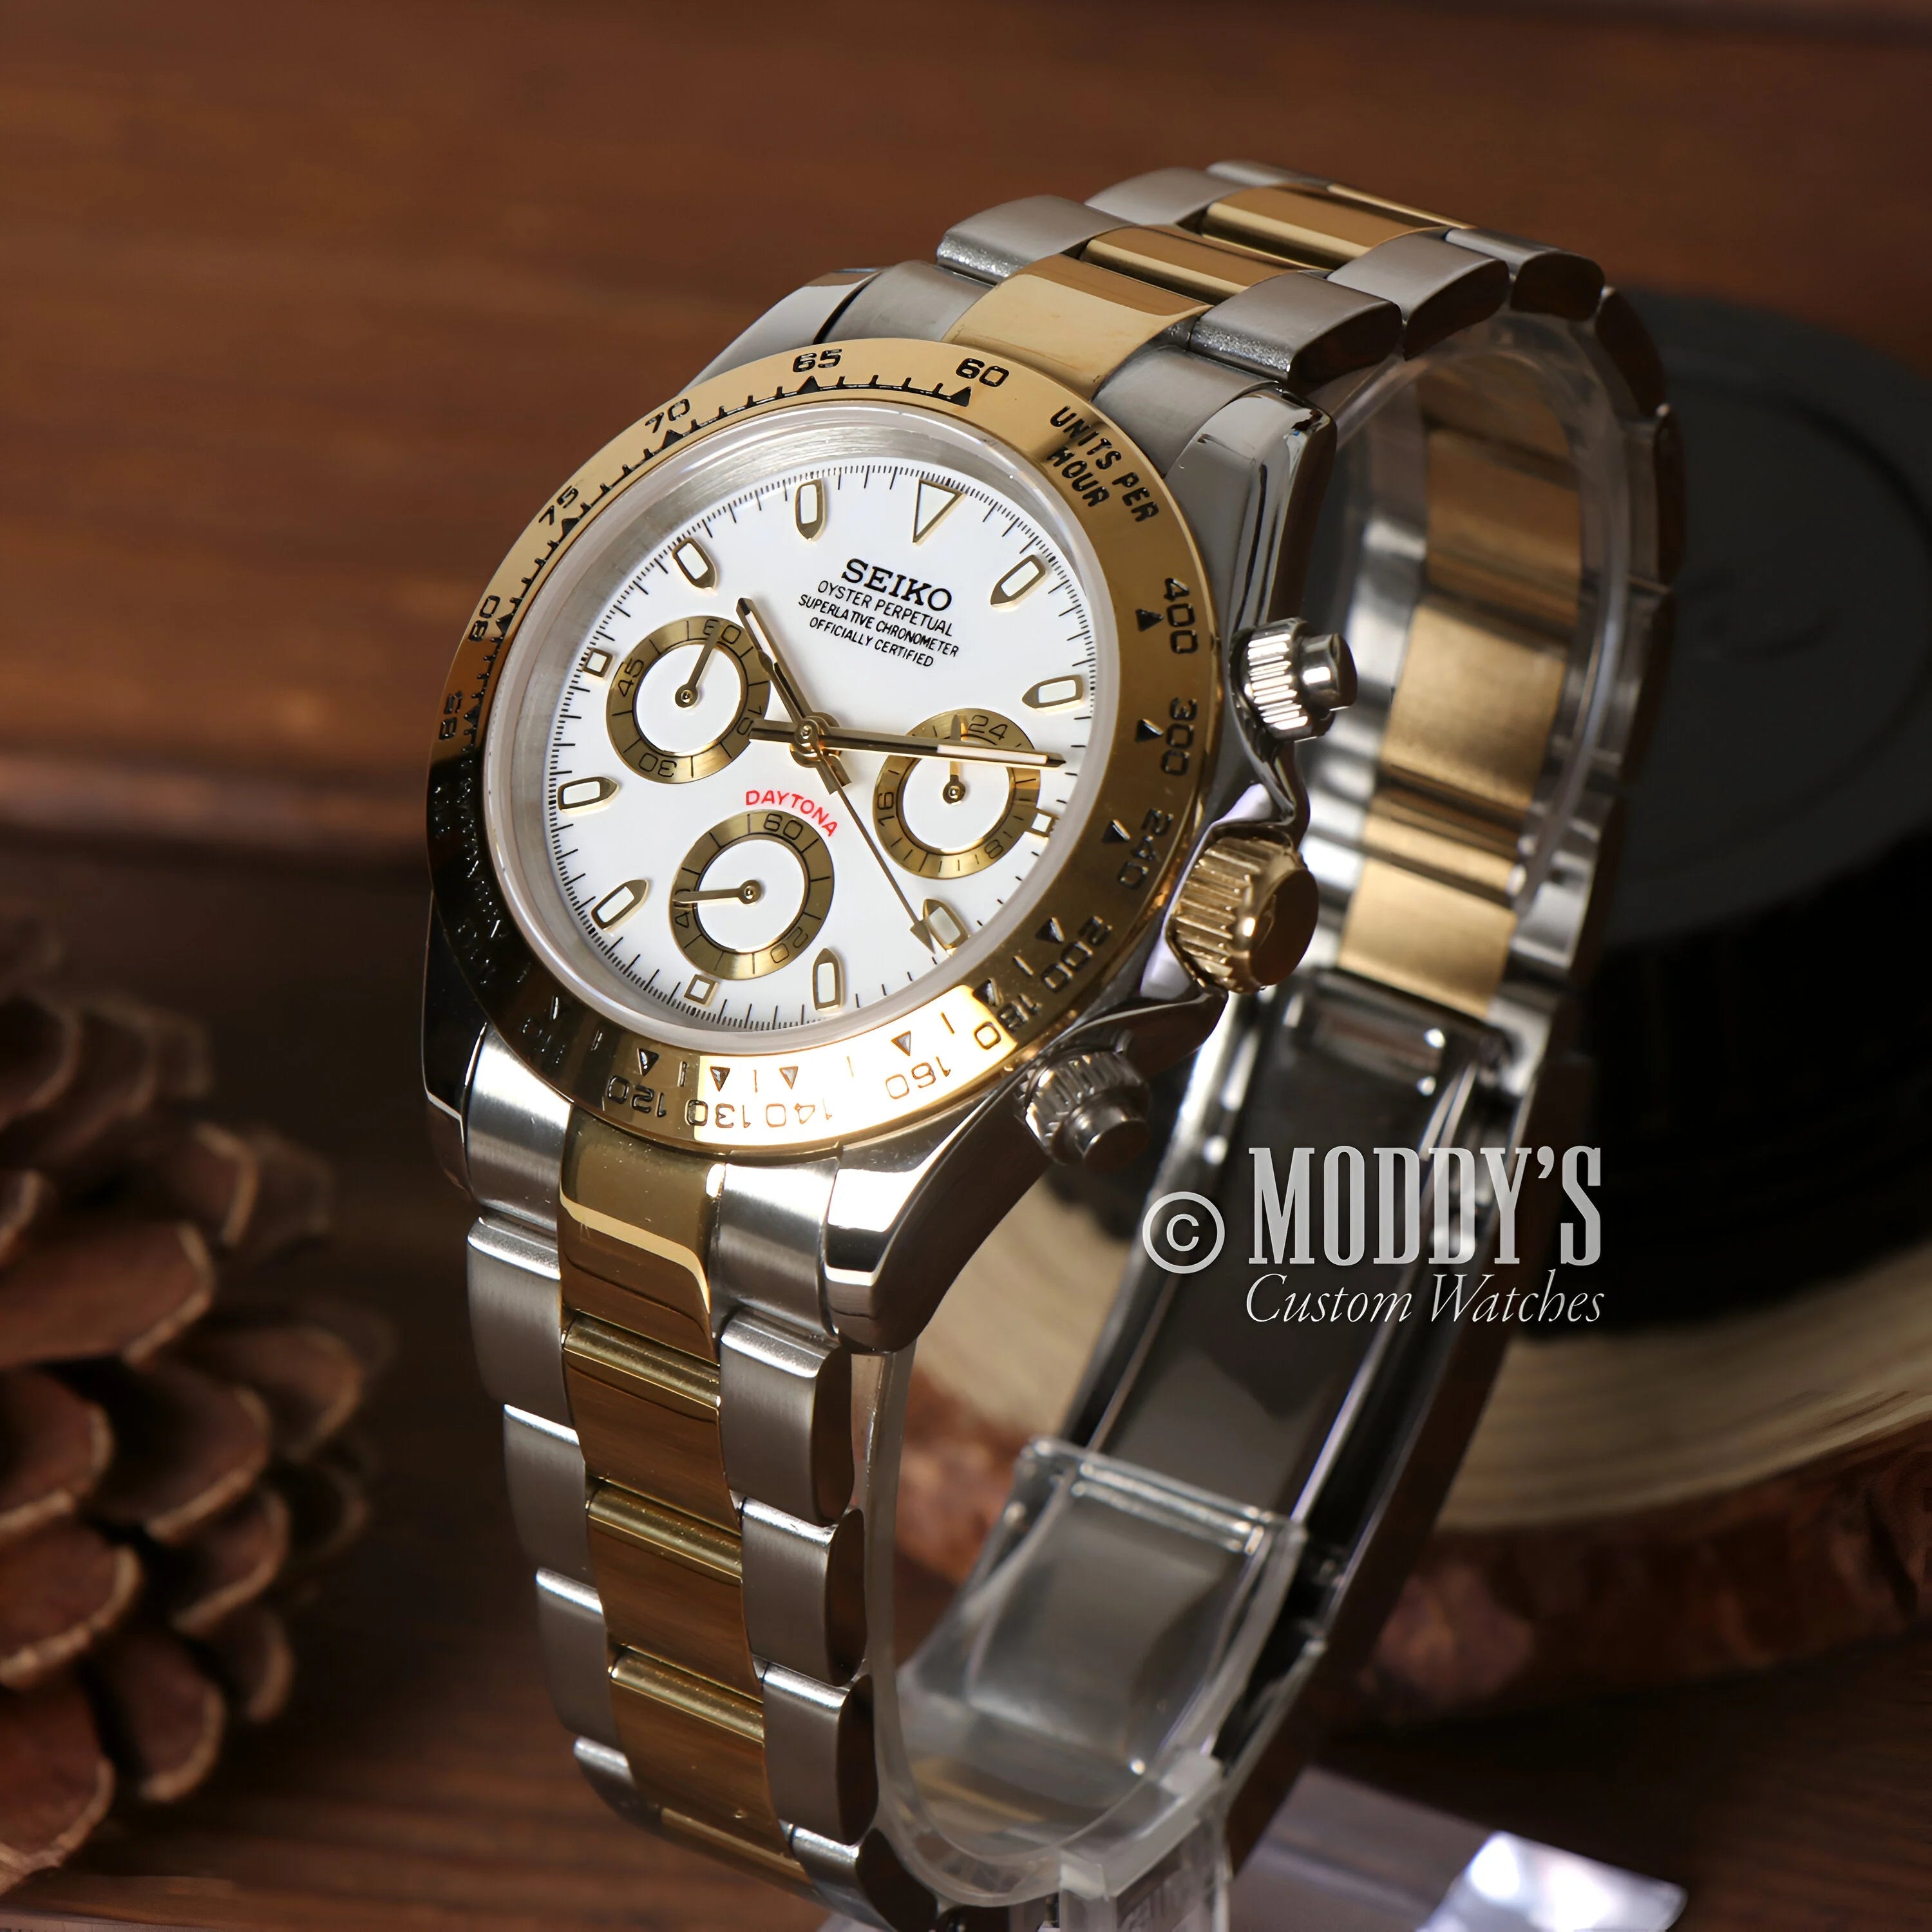 Seiko Vk63 Hybrid Chronograph With 904l Stainless Steel And Gold Bracelet - Seitona Silver-gold